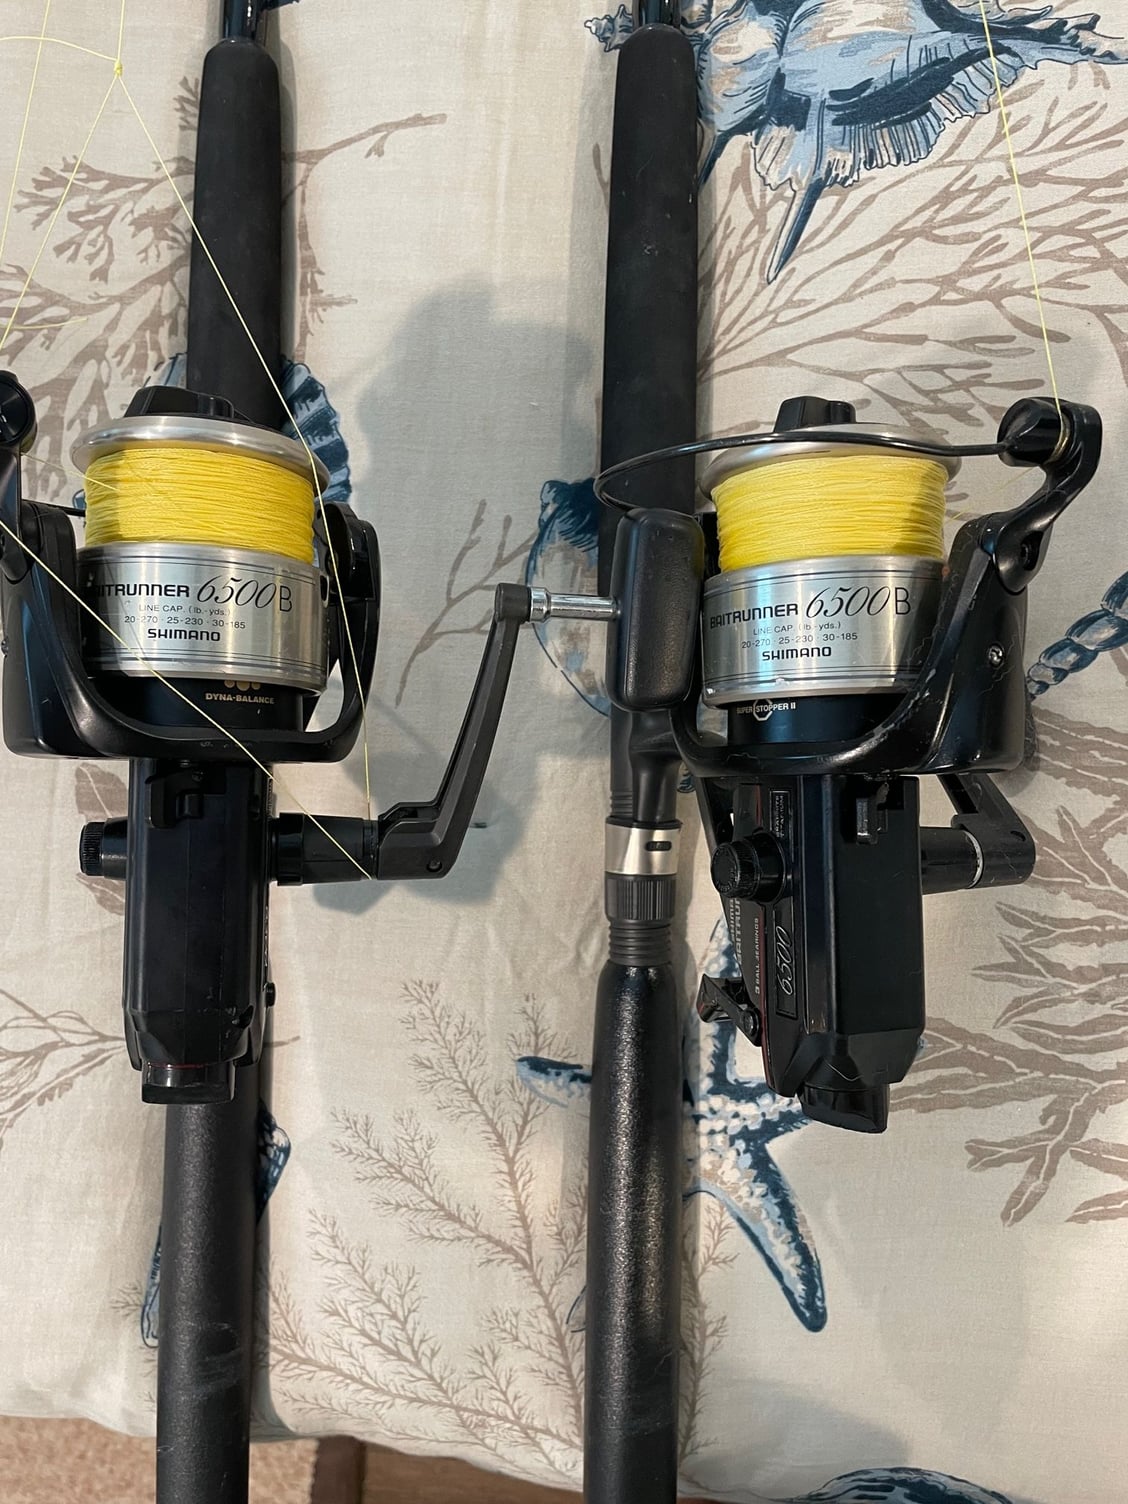 2 Shimano Baitrunner 6500B Combos For Sale - The Hull Truth - Boating and  Fishing Forum